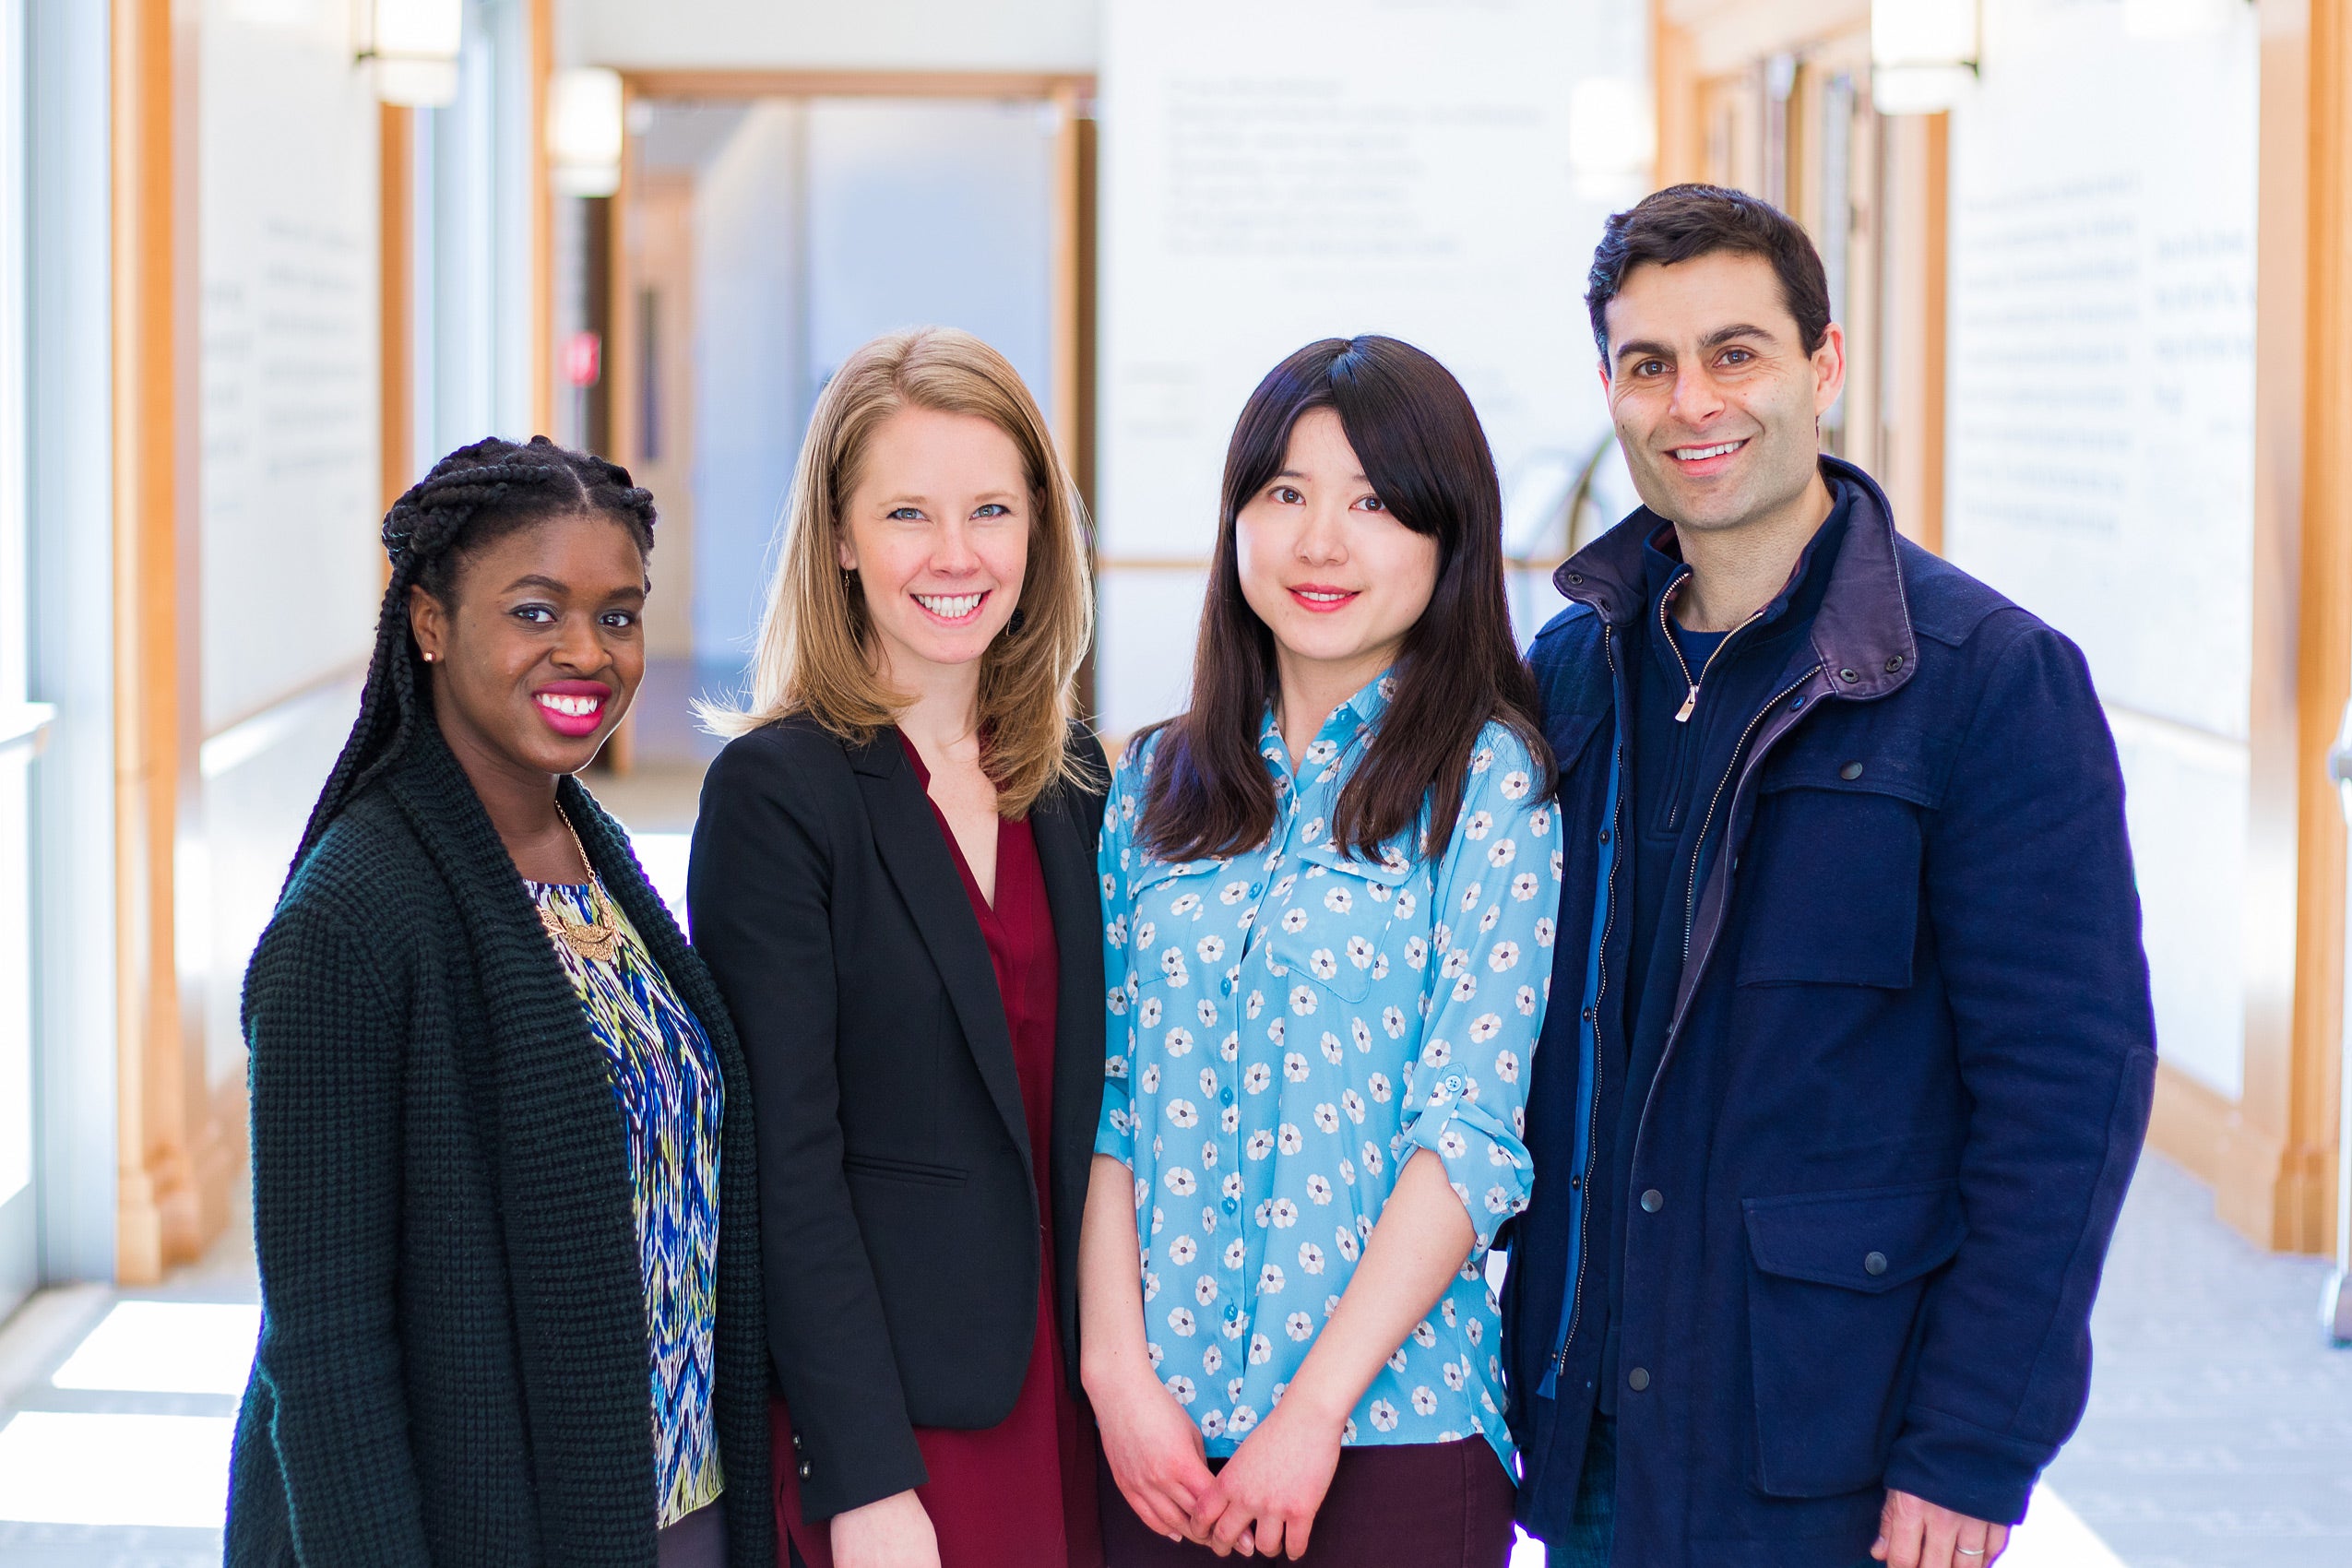 Crystal Nwaneri, Marin Tollefson, Patrick Sharma, and Qiongyue Hu pose together in a bright room